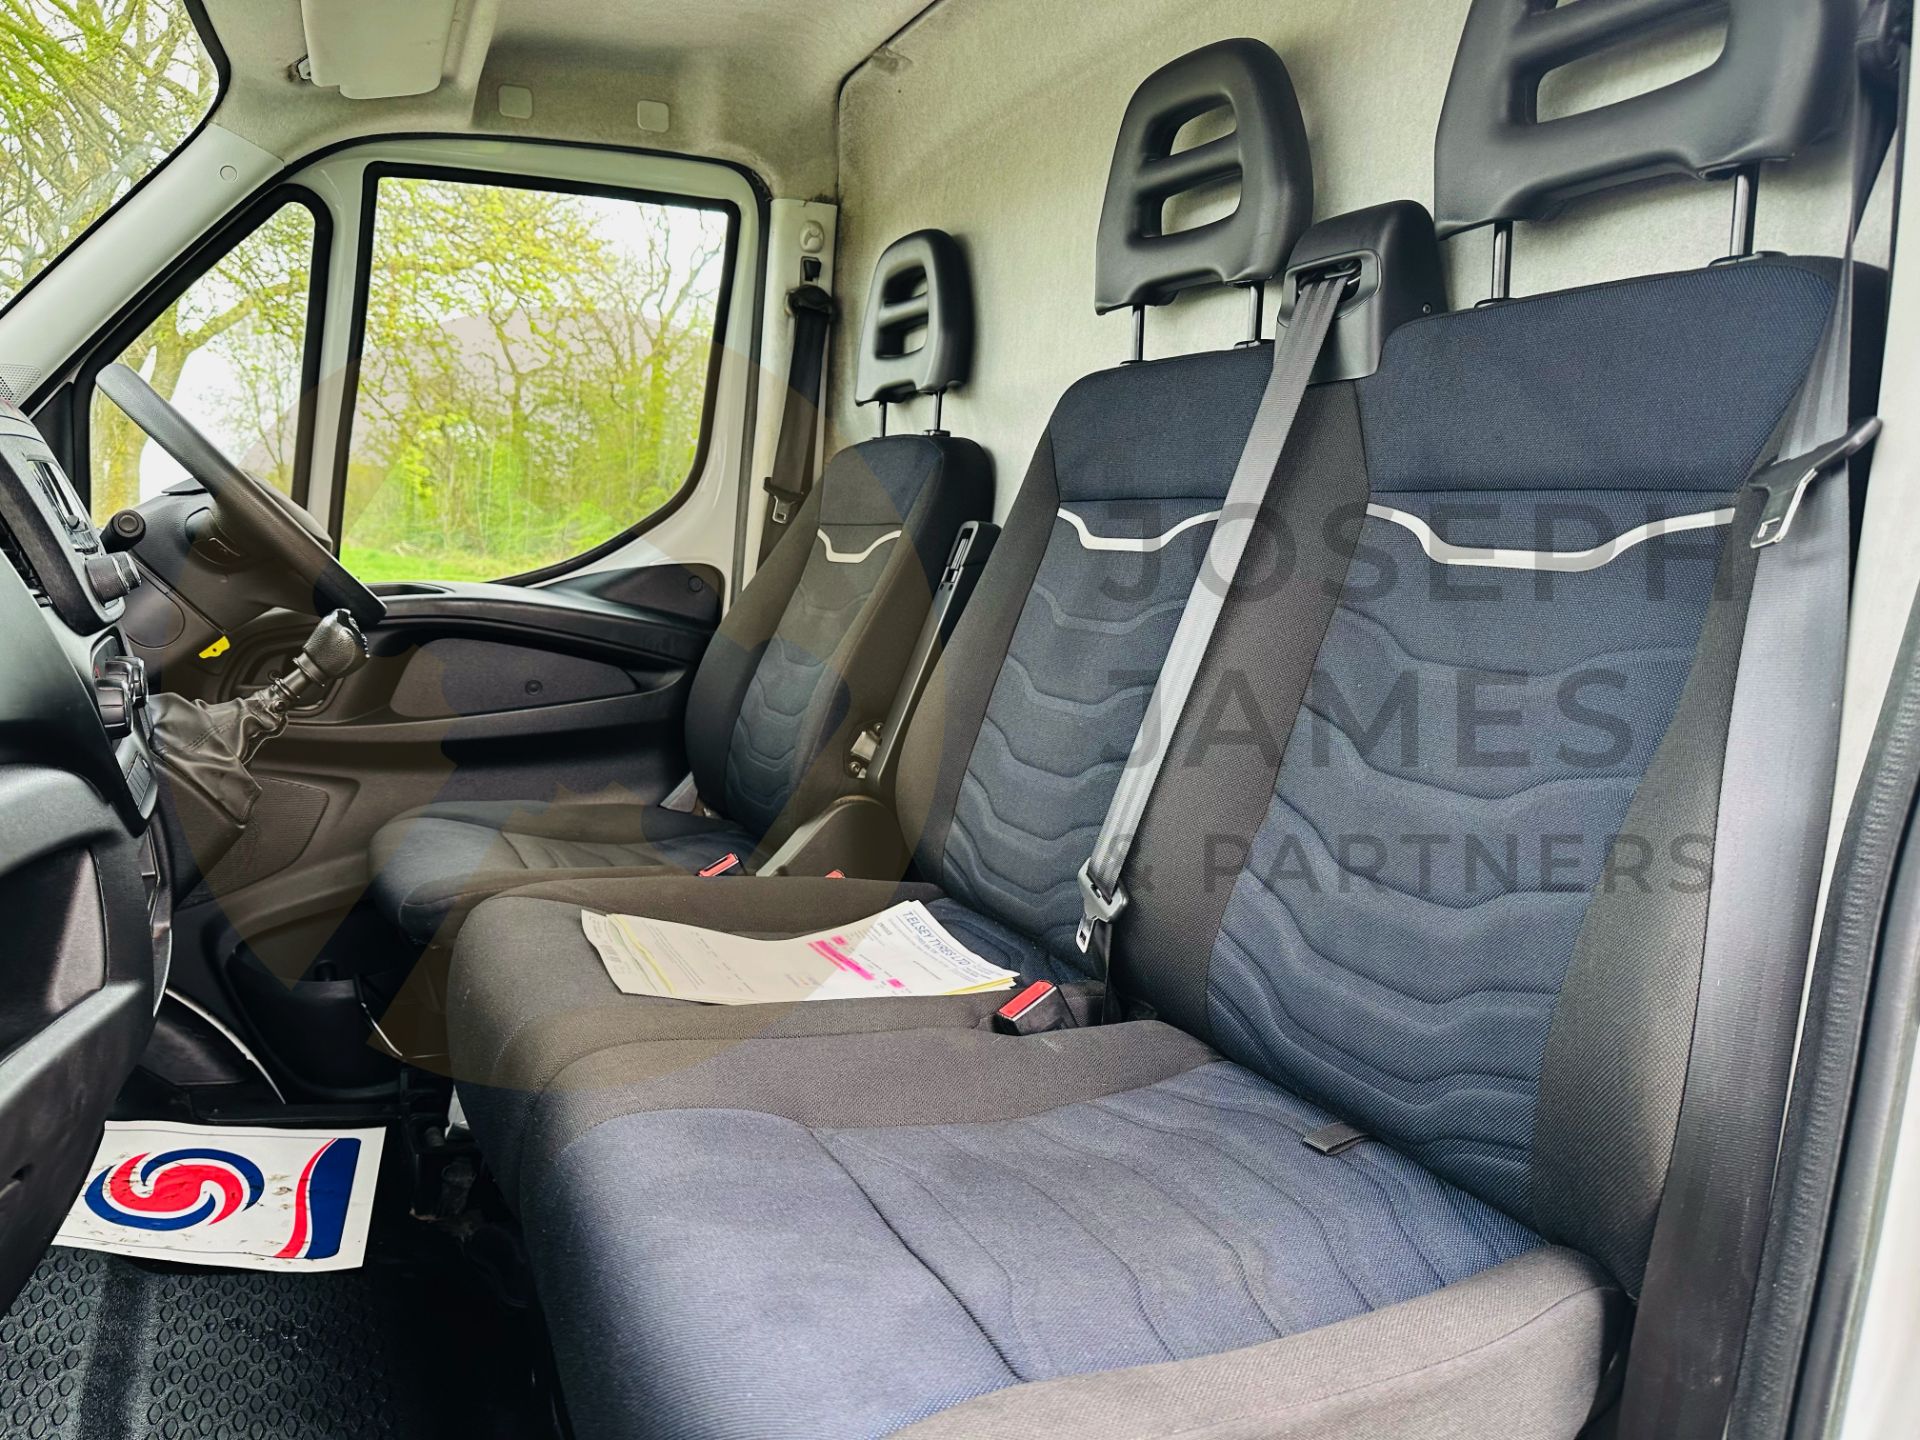 IVECO DAILY 35-140 LONG WHEEL BASE HIFG ROOF - 2021 REG (NEW SHAPE) ONLY 85K MILES - AIR CON - LOOK! - Image 17 of 30